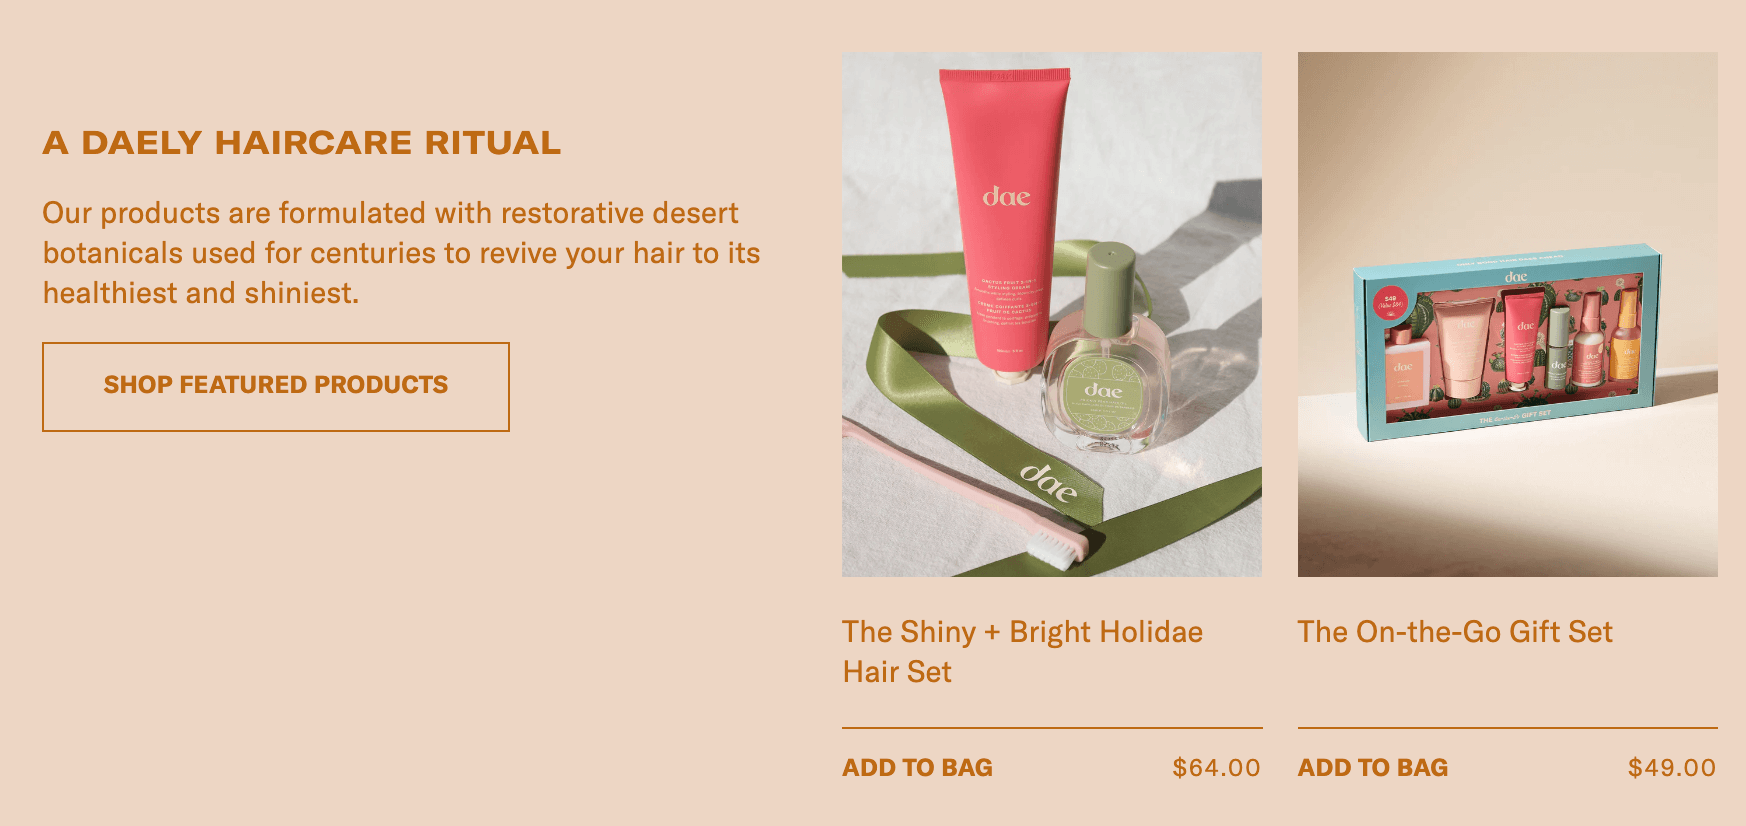 Dae Hair has great brand consistency from their website to their products.